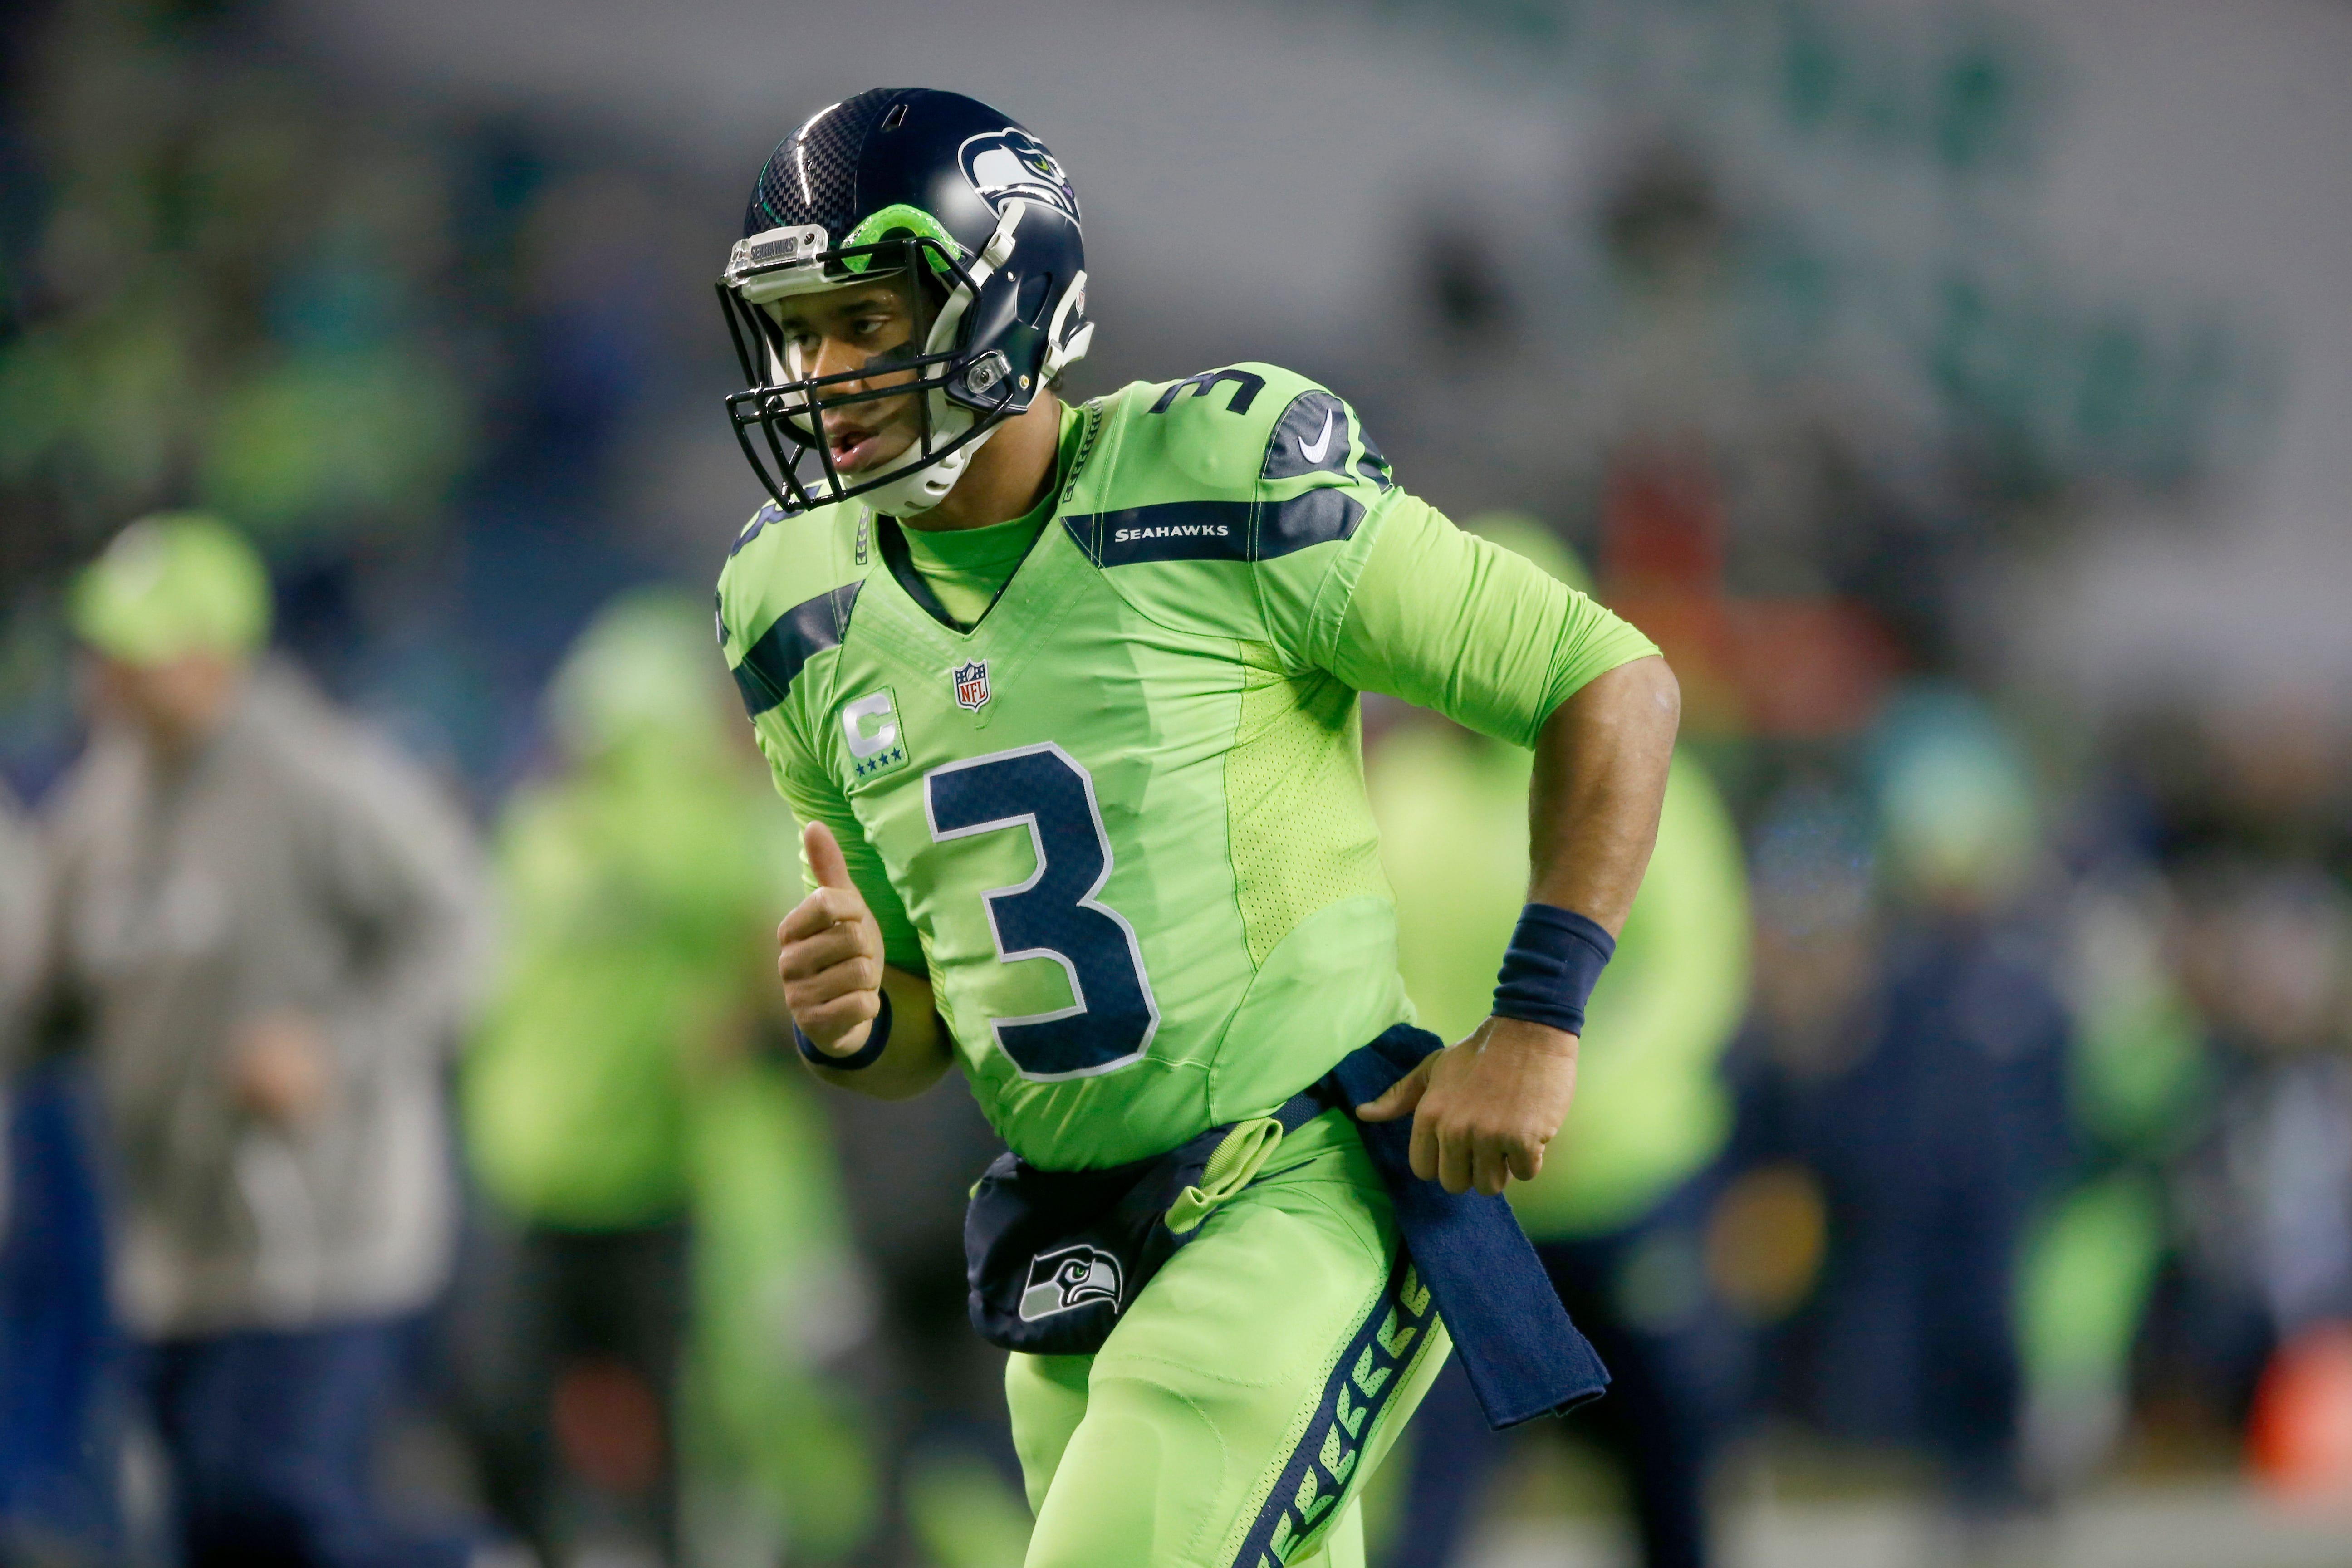 seahawks action green uniforms